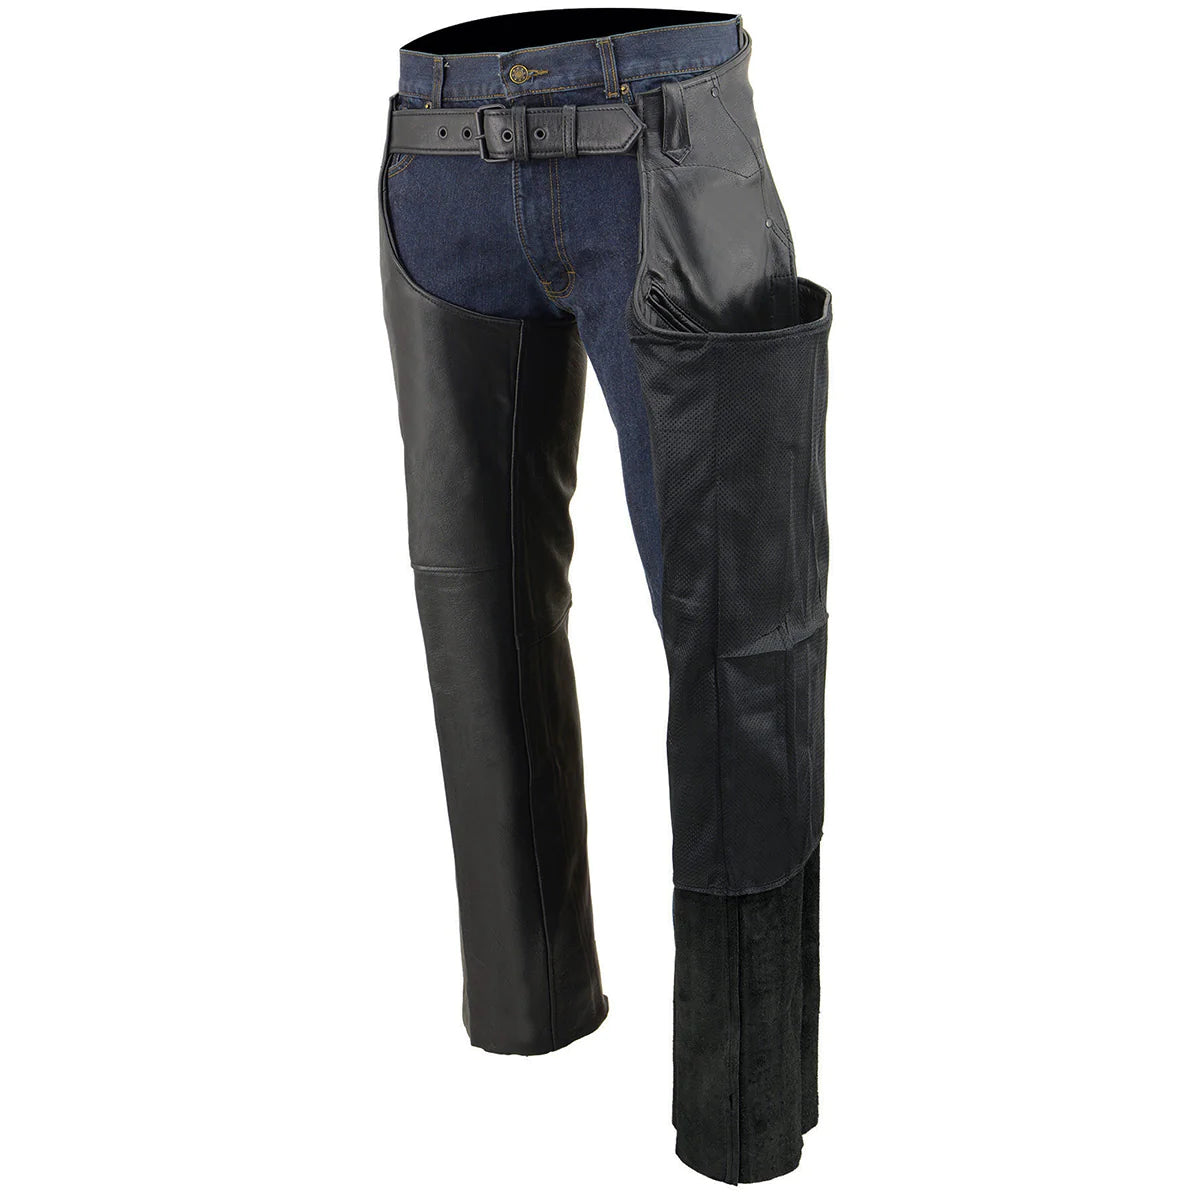 Men's Black Premium Leather 3 Pocket Chaps with Thigh Patch Pocket